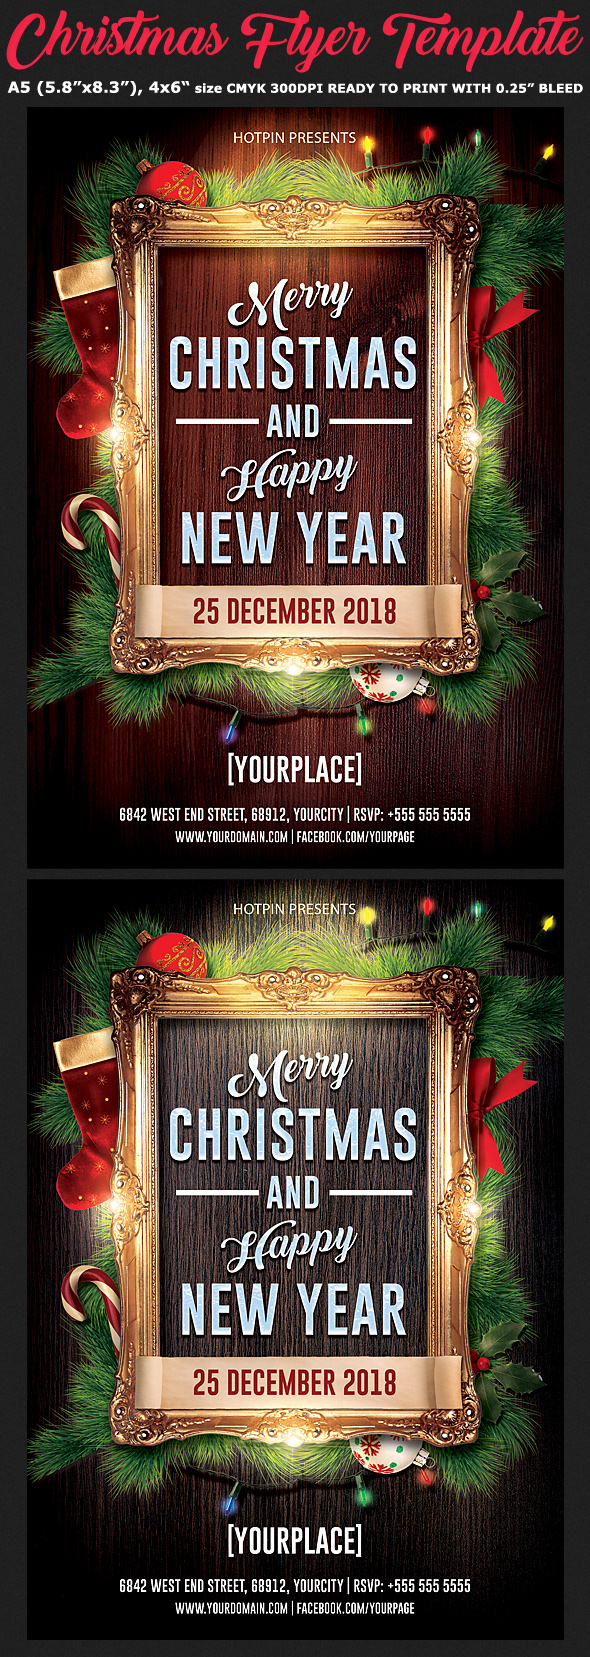 End Of Year Flyer - Untitled : Flyer works for any video game events or tournaments for your ...